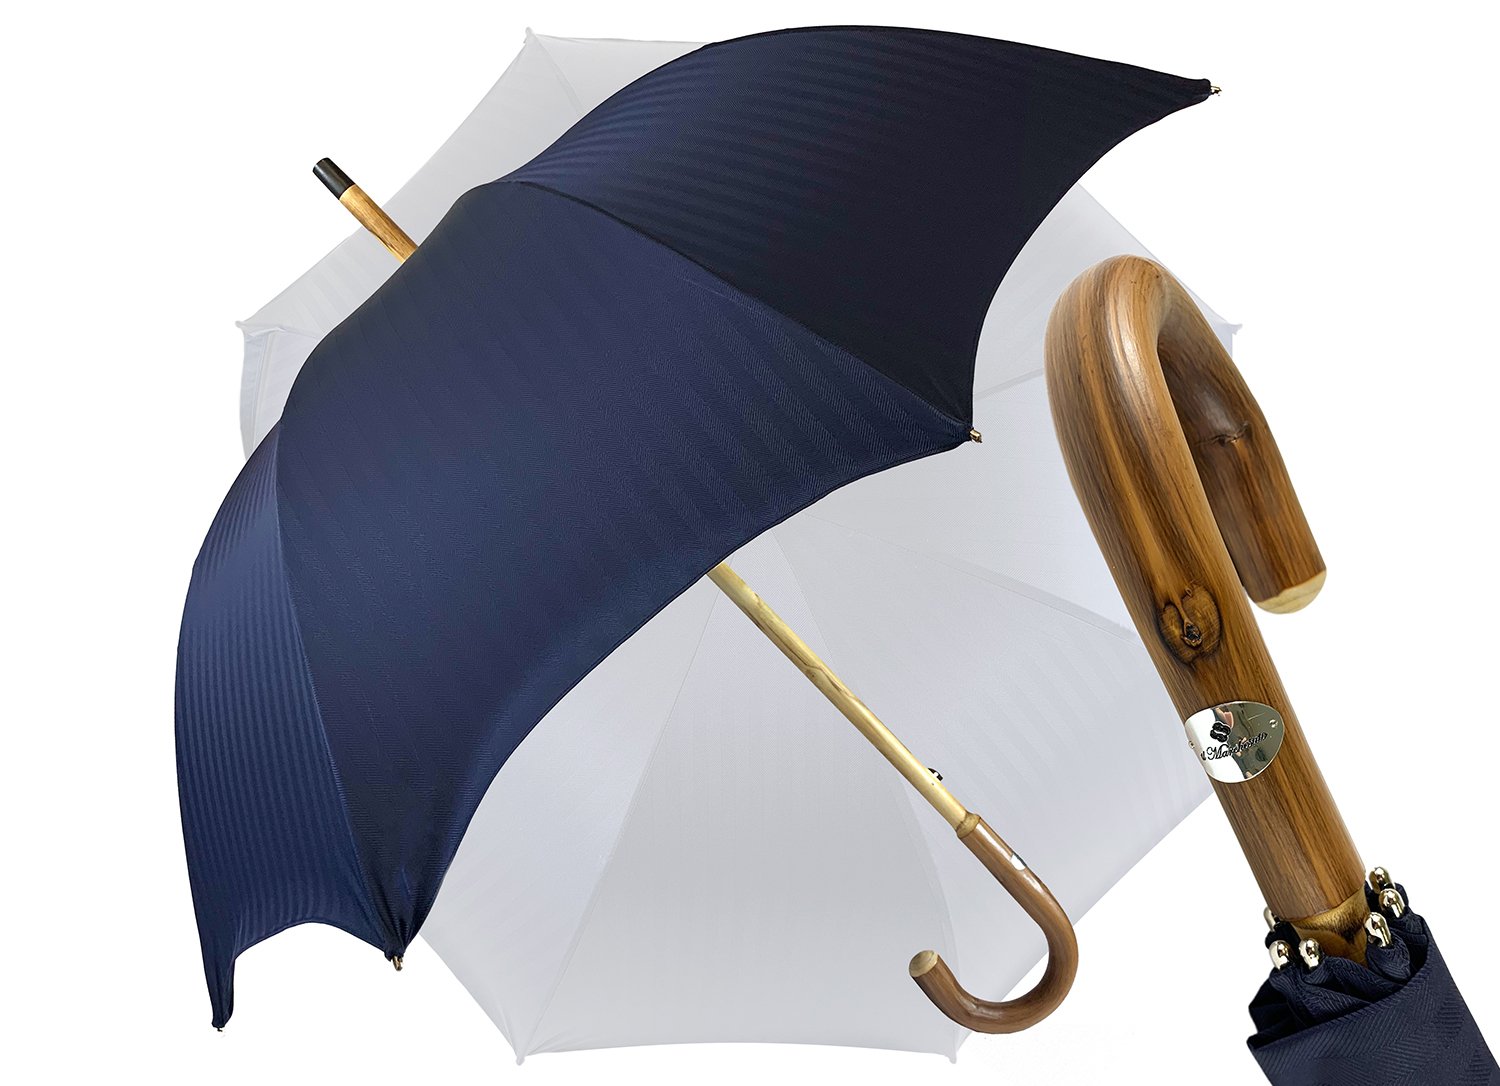 Blue Navy umbrella with Natural Chestnut Wood hand-curved - IL MARCHESATO LUXURY UMBRELLAS, CANES AND SHOEHORNS